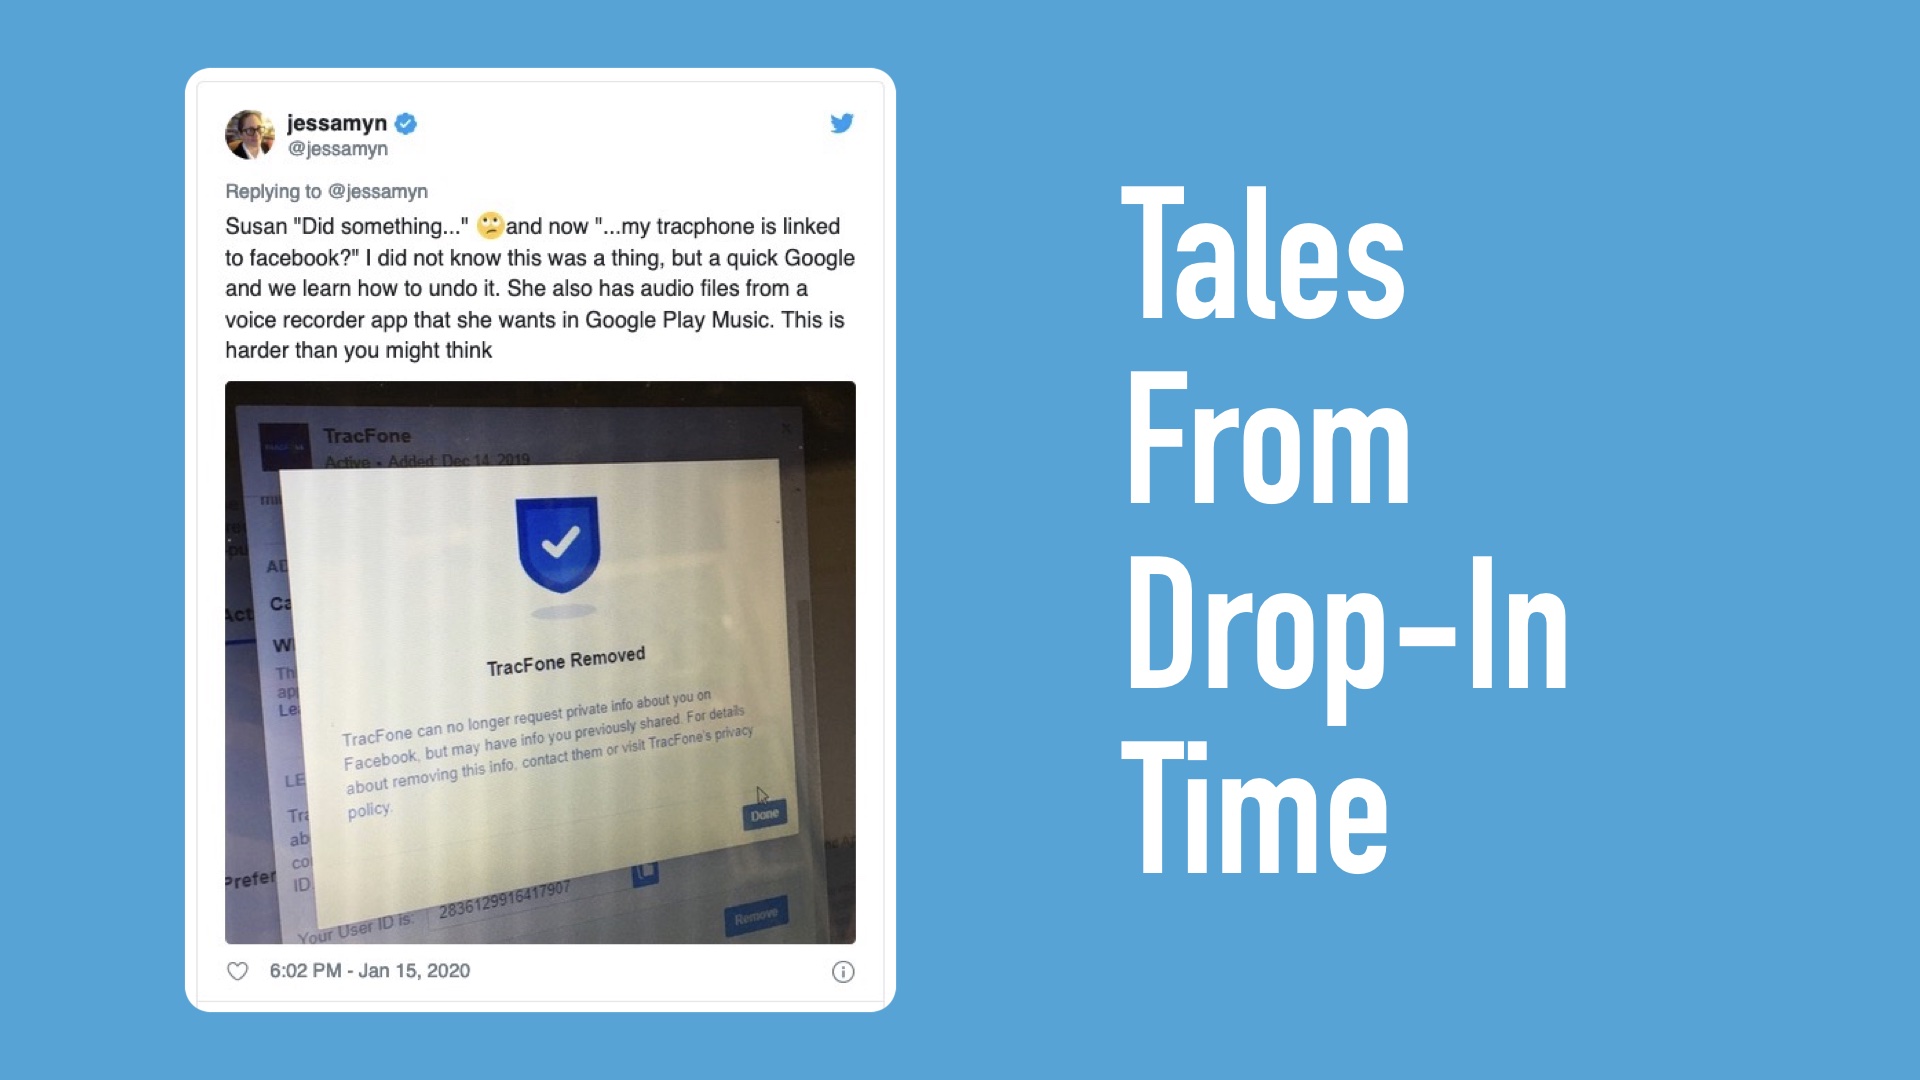 Tweet from tales from Drop in Time about a woman who somehow connected her trac phone to facebook